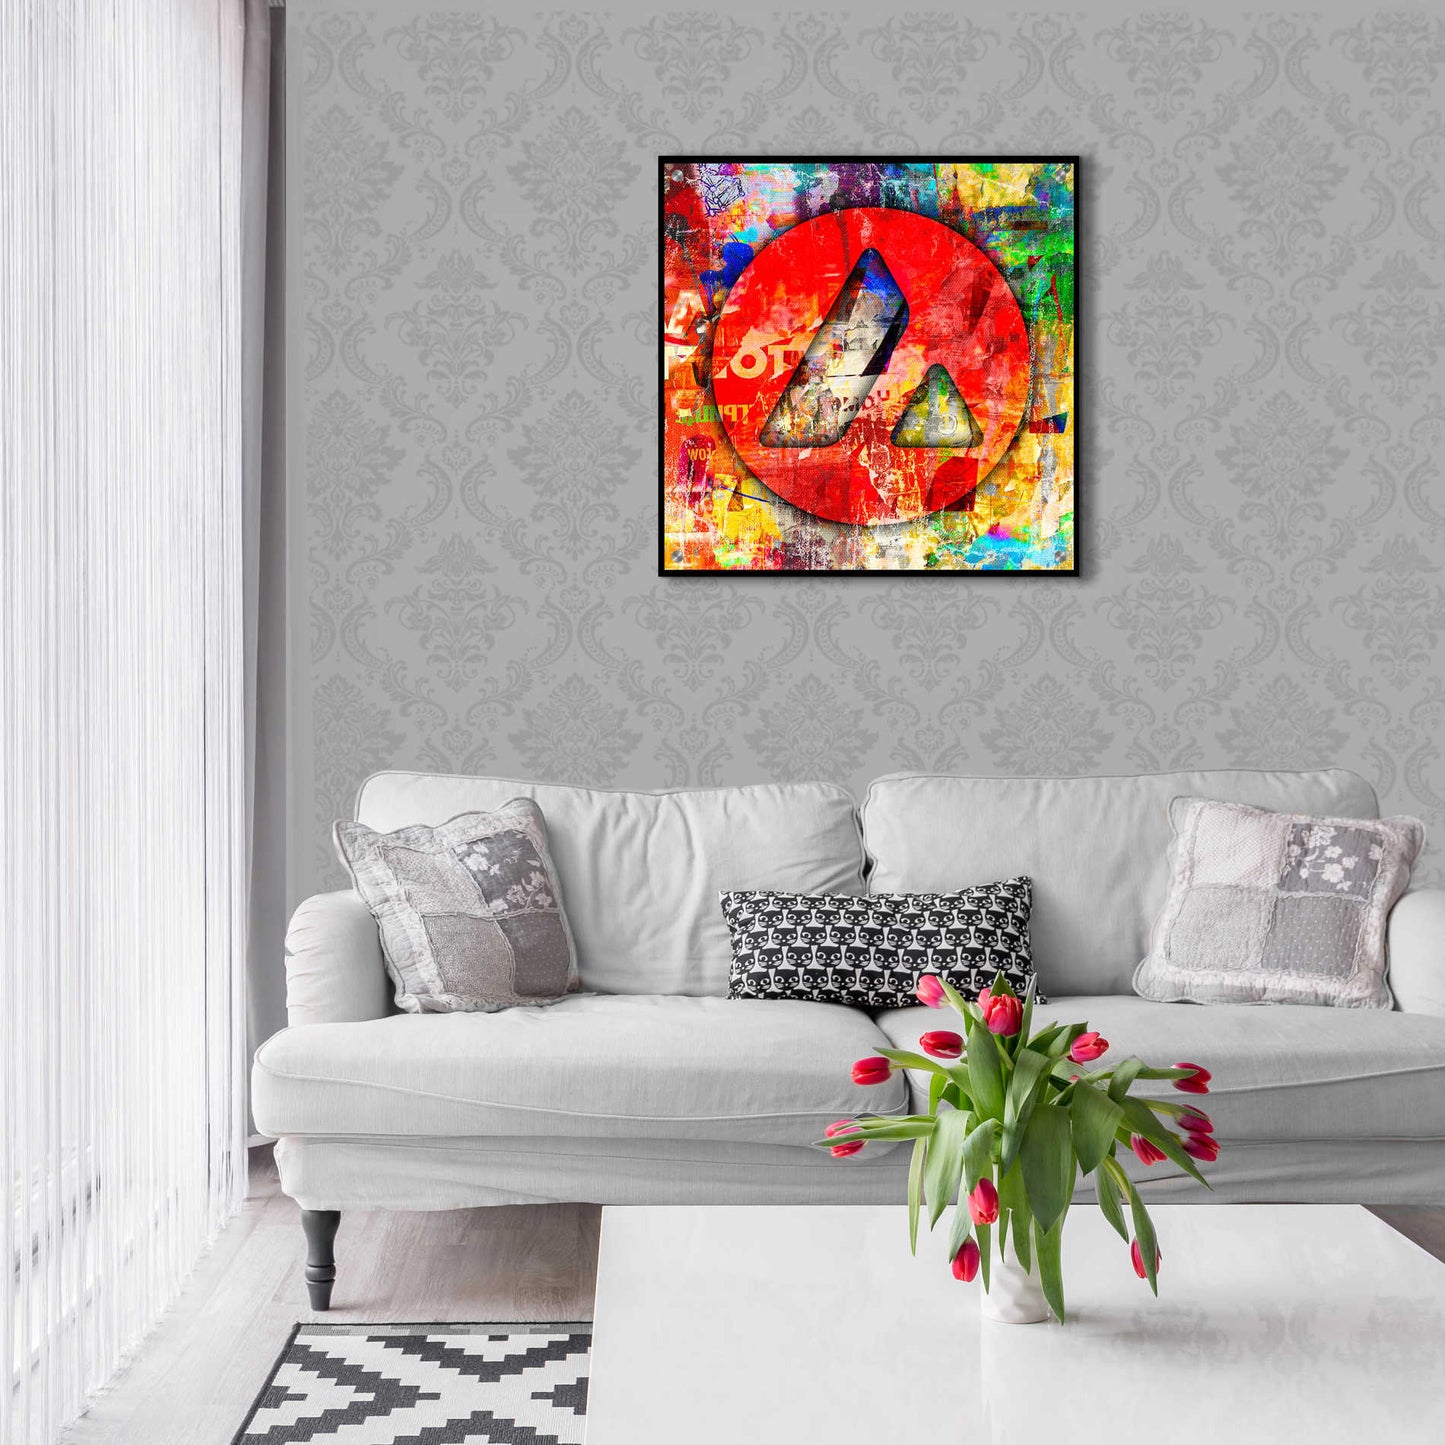 Epic Art 'Avax Avalanche Crypto In Color' by Epic Art Portfolio, Acrylic Glass Wall Art,24x24